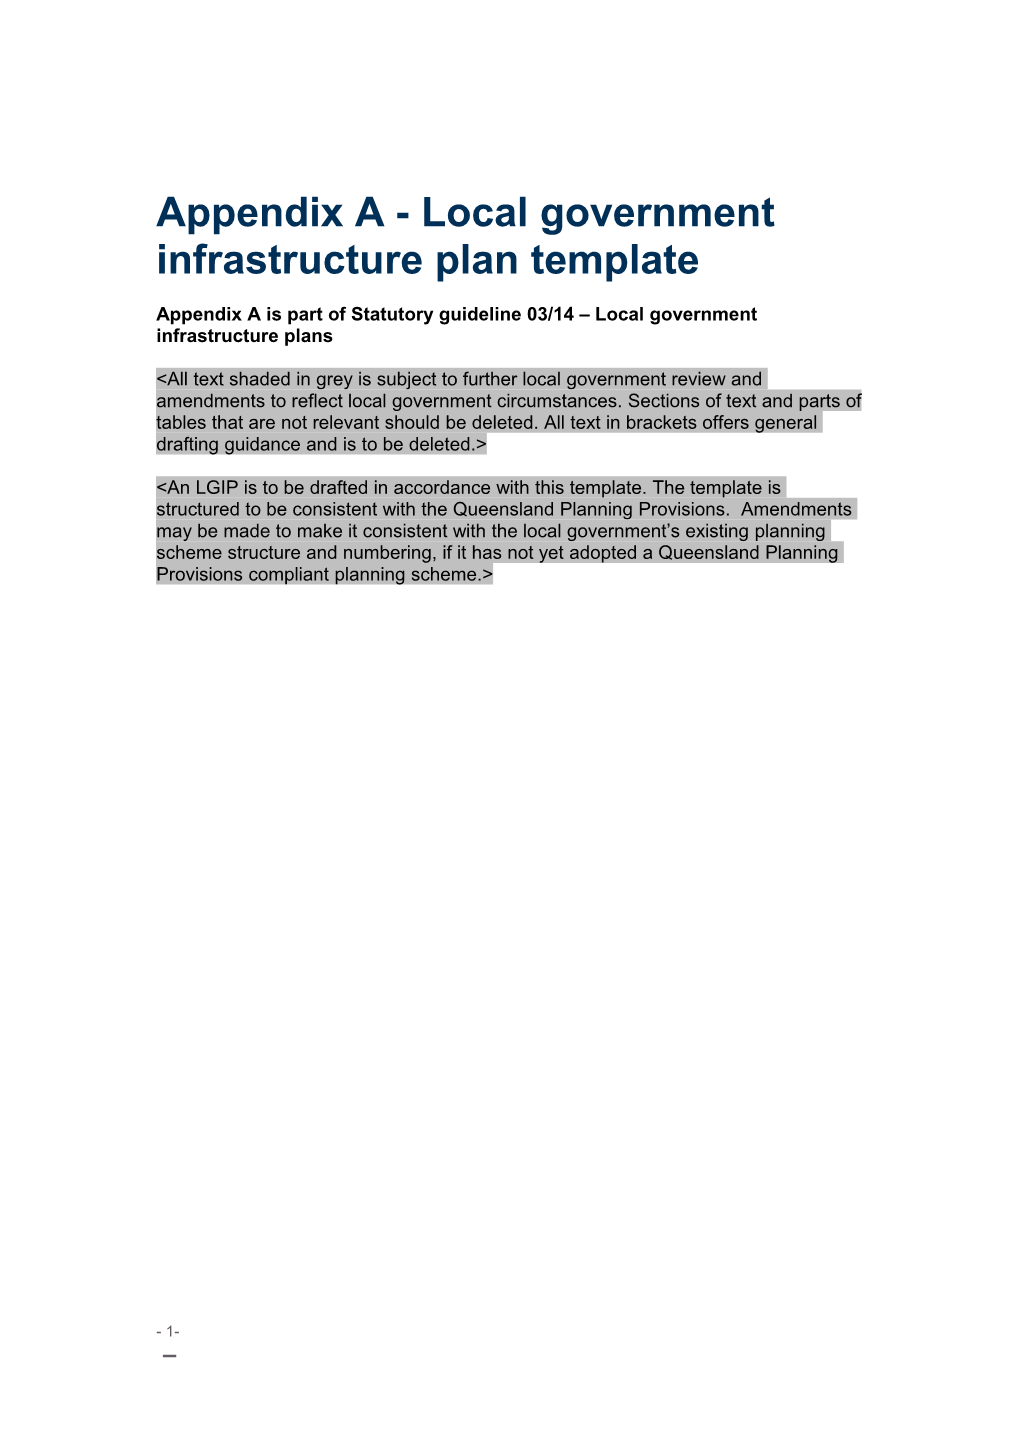 Statutory Guideline 03/14 Priority Infrastructure Plan - Appendix a - Local Government